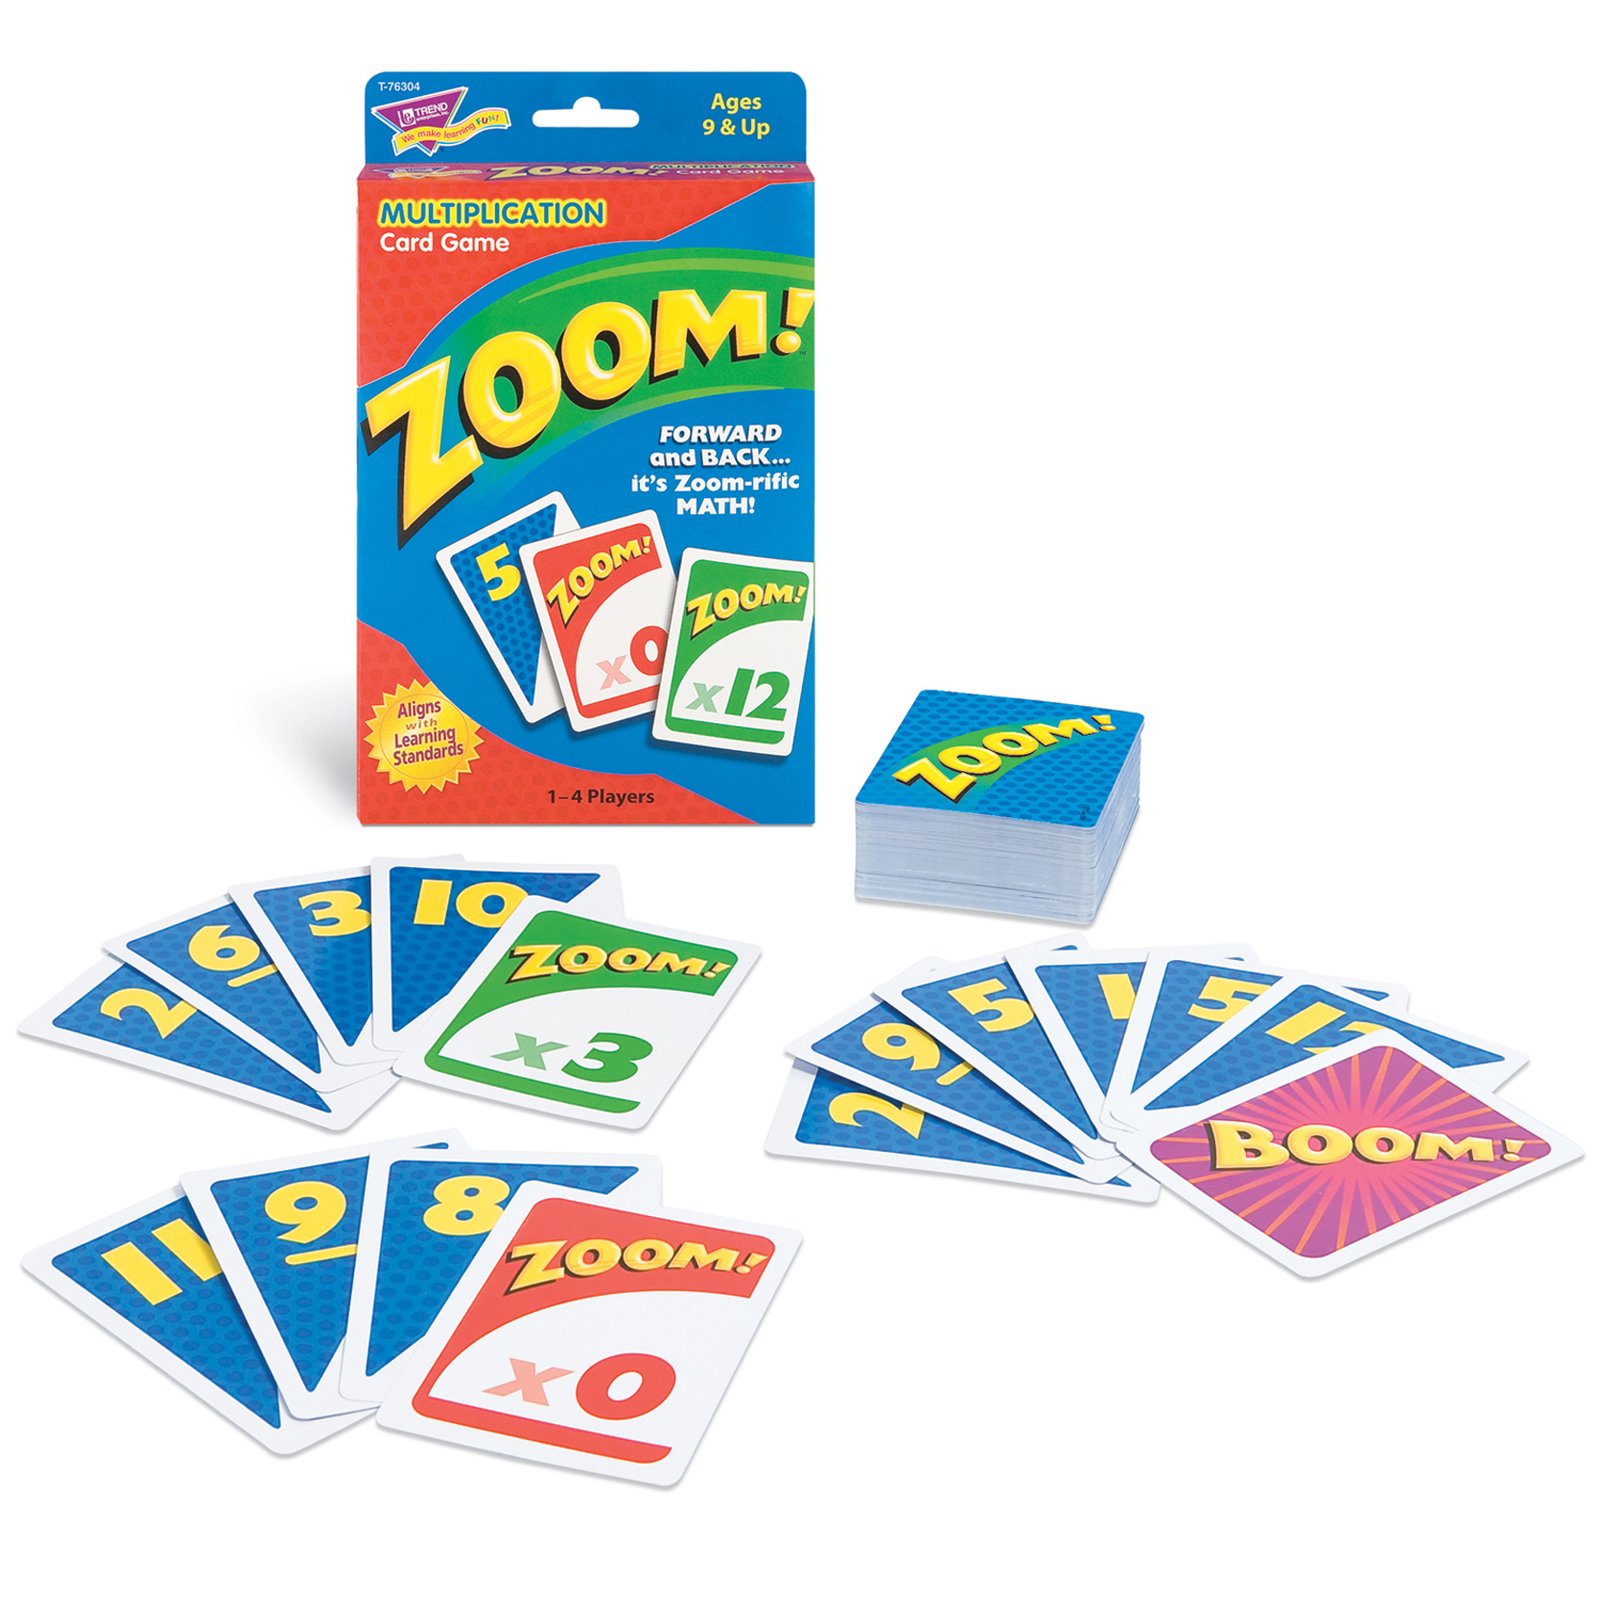 TREND ENTERPRISES: Zoom! Multiplication Card Game, Use Addition Skills, Build Multiplication Skills, Test Probability, Surprise Cards Send Scores to Zero, 1 to 4 Players, For Ages 9 and Up